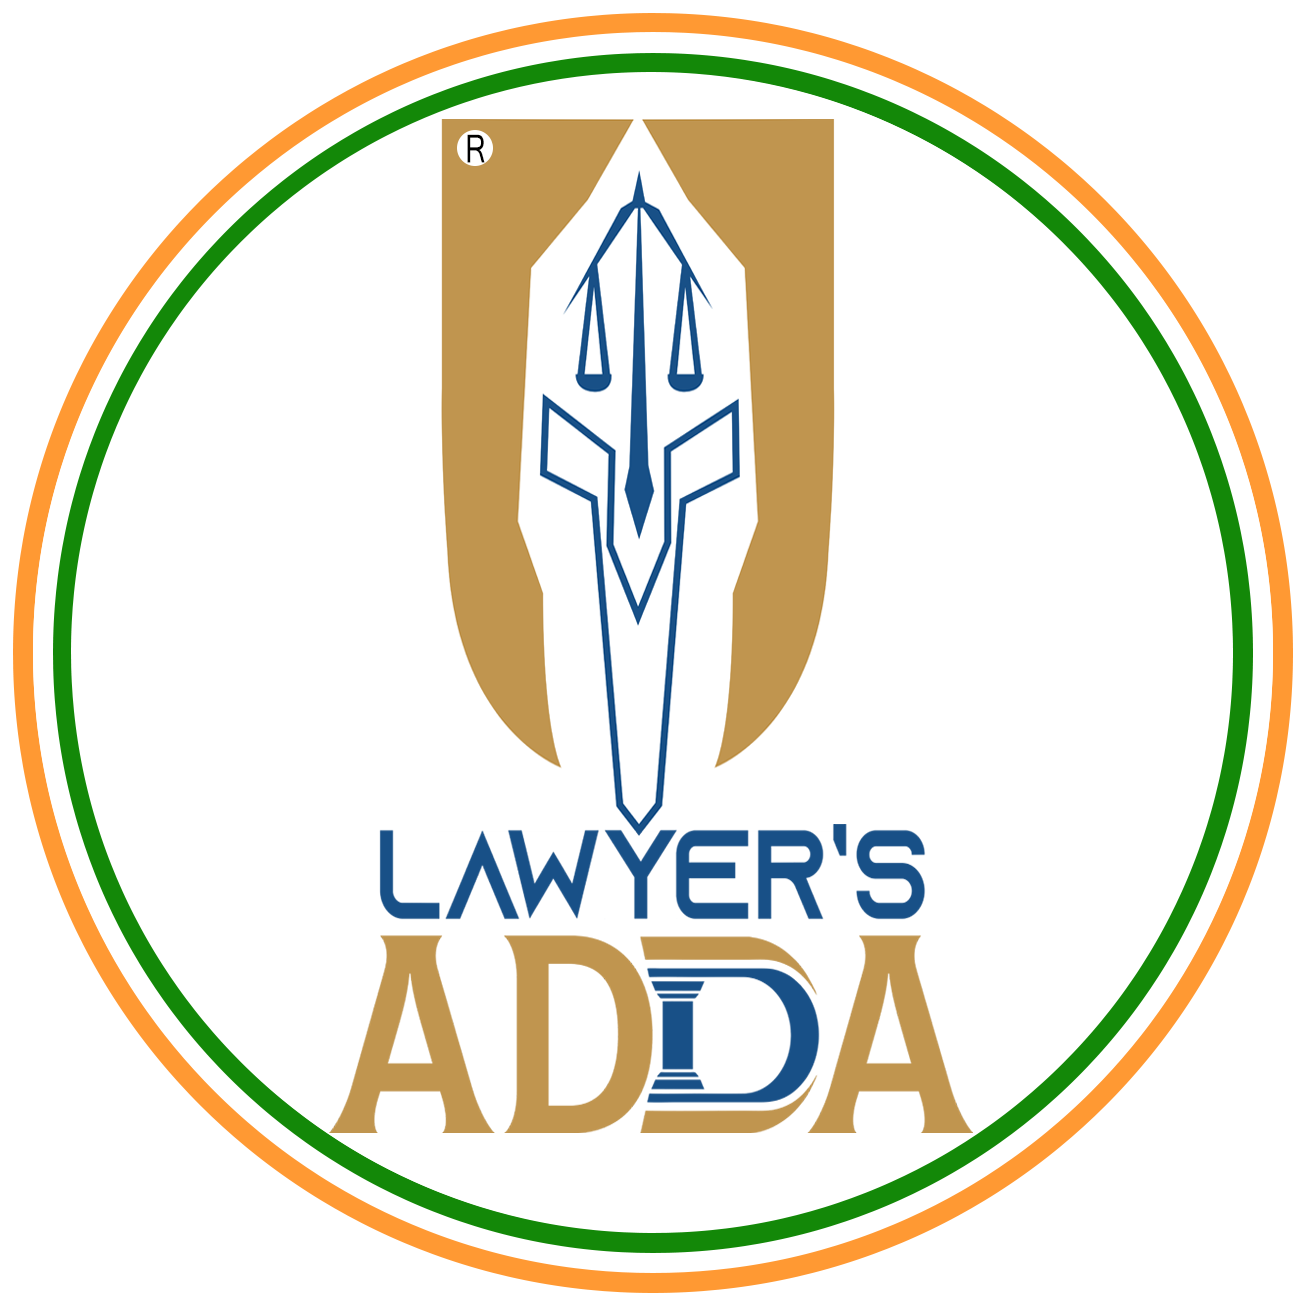 Lawyer's ADDA Law-Firm|Legal Services|Professional Services